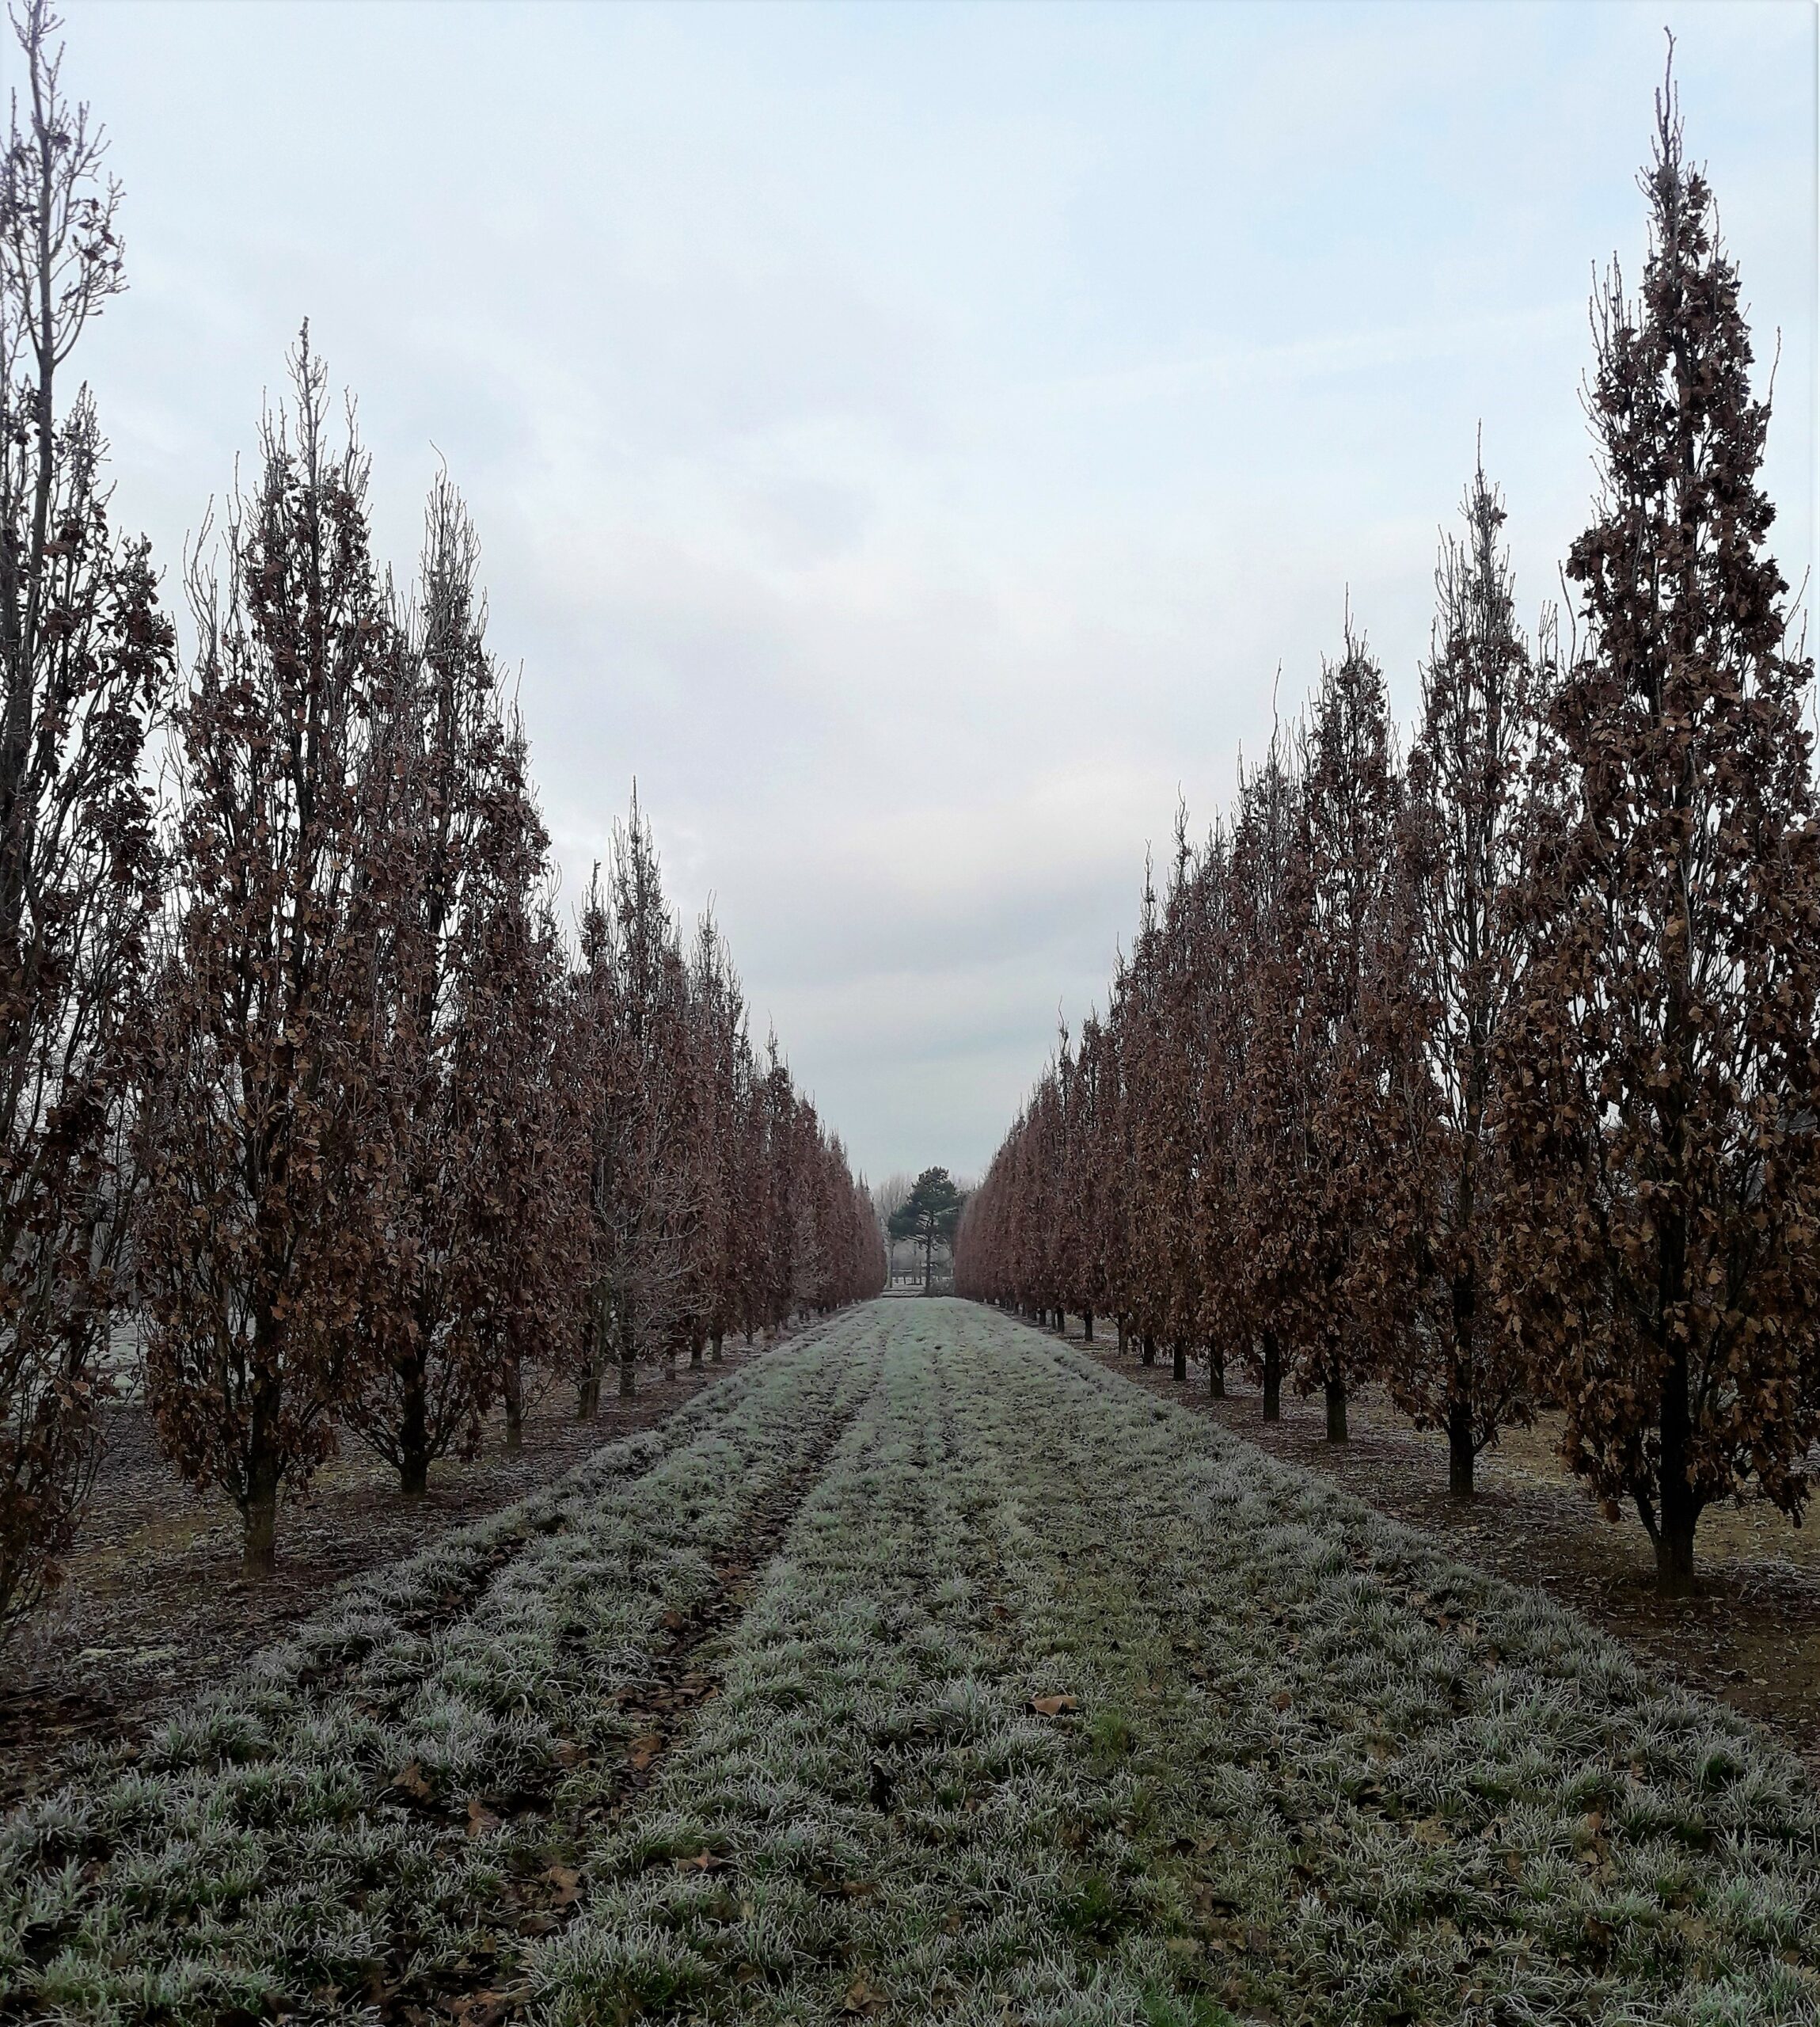 Quercus robur fastigiata Koster feathered trees growing in rows in field on a frosty morning